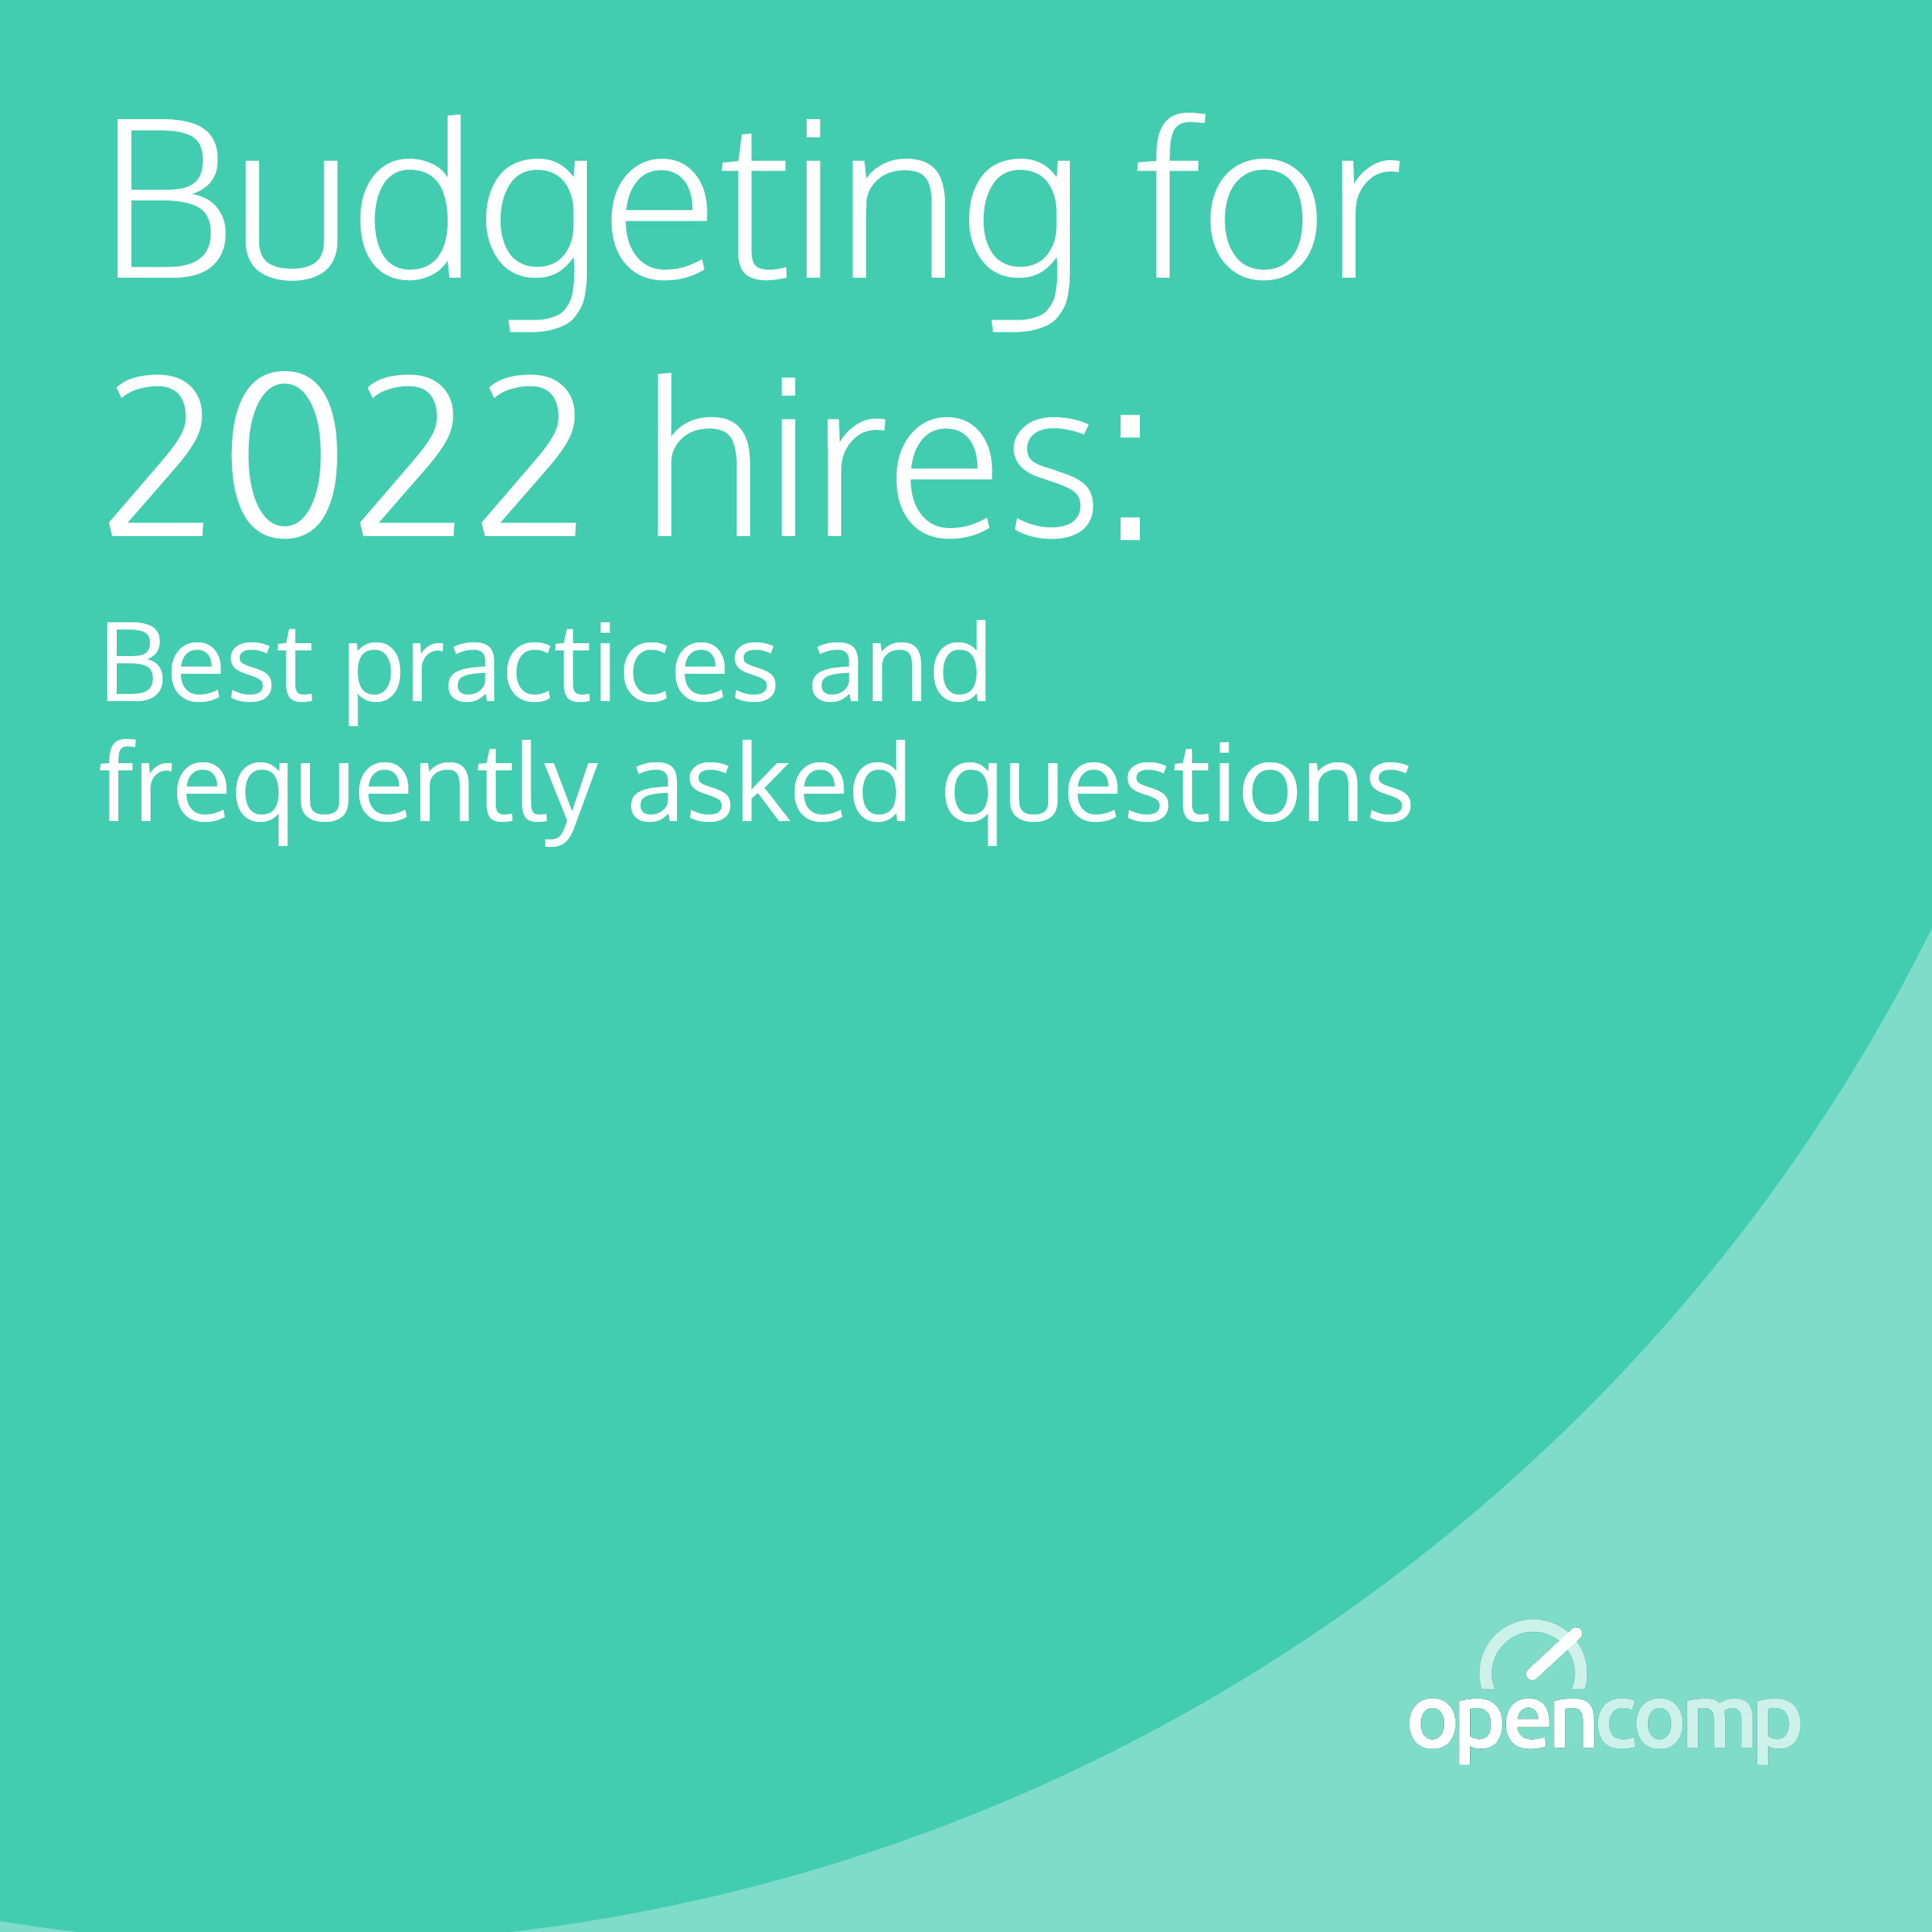 Budgeting for 2022 Hires: Best Practices and FAQs for Series B Startup Salaries and More